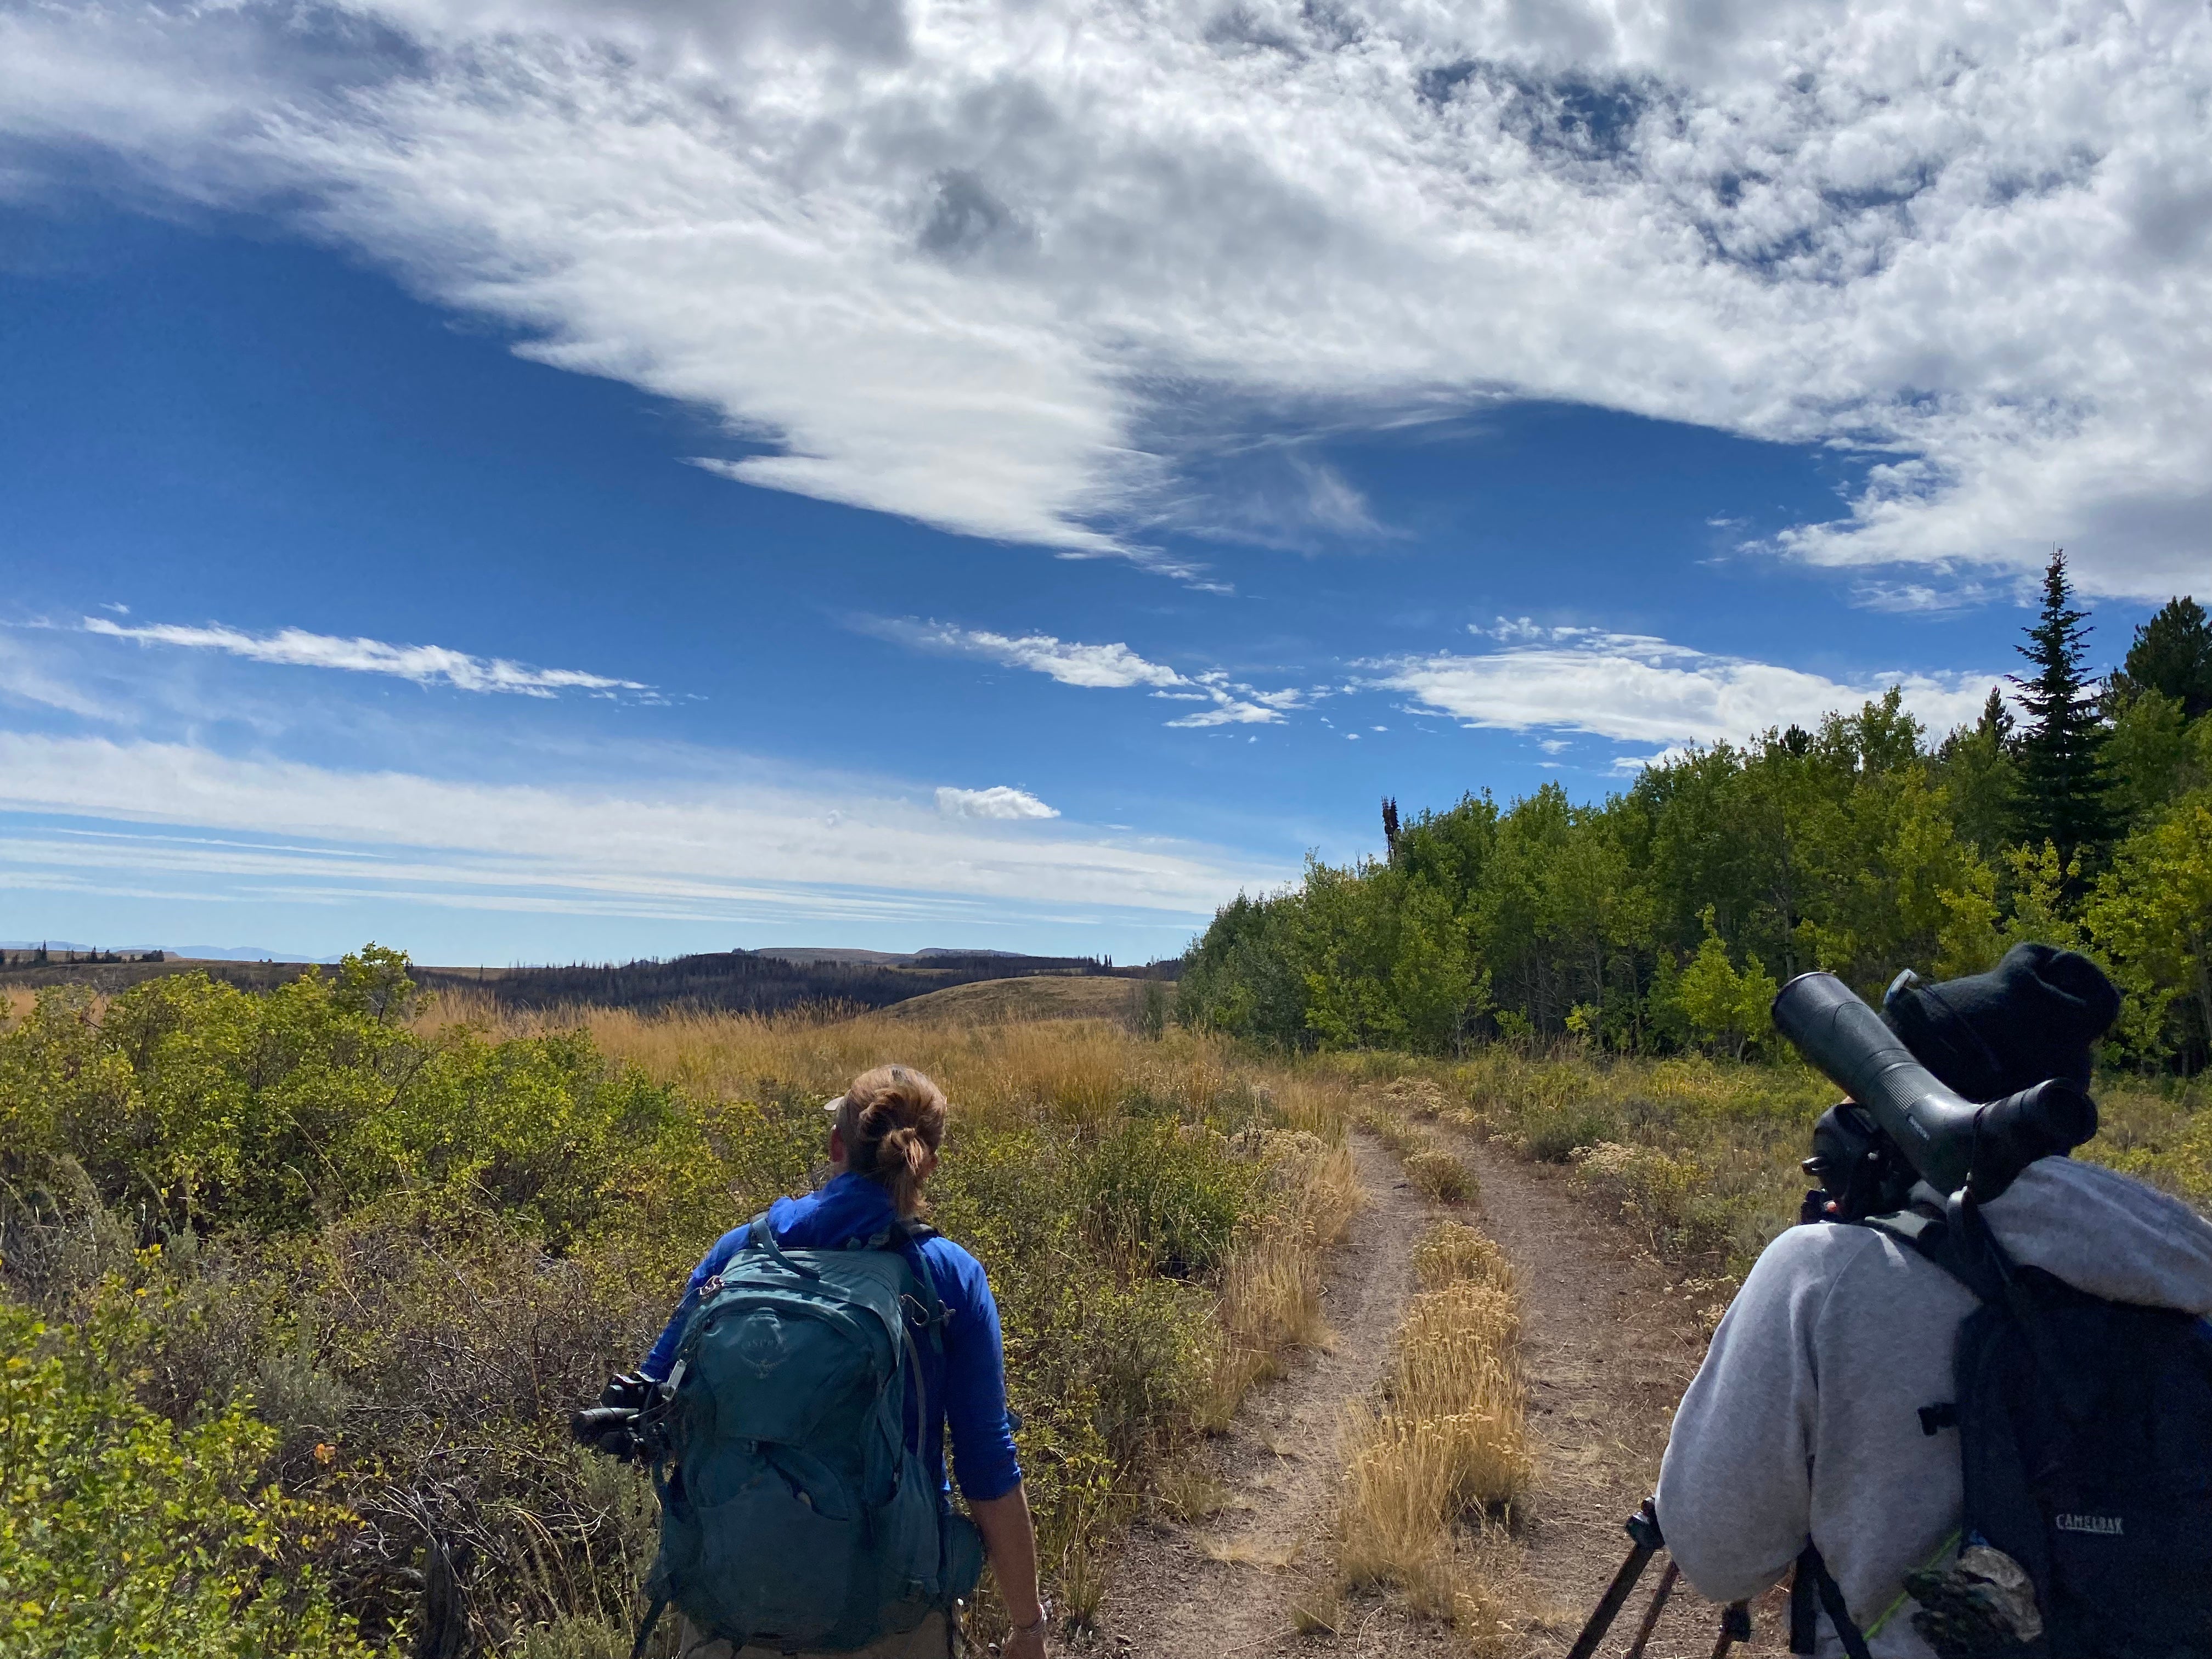 two biologists walk facing away from the camera. a huge blue sky with high white clouds, and some shrubby aspen groves are in the background. it's a beautiful sunny day